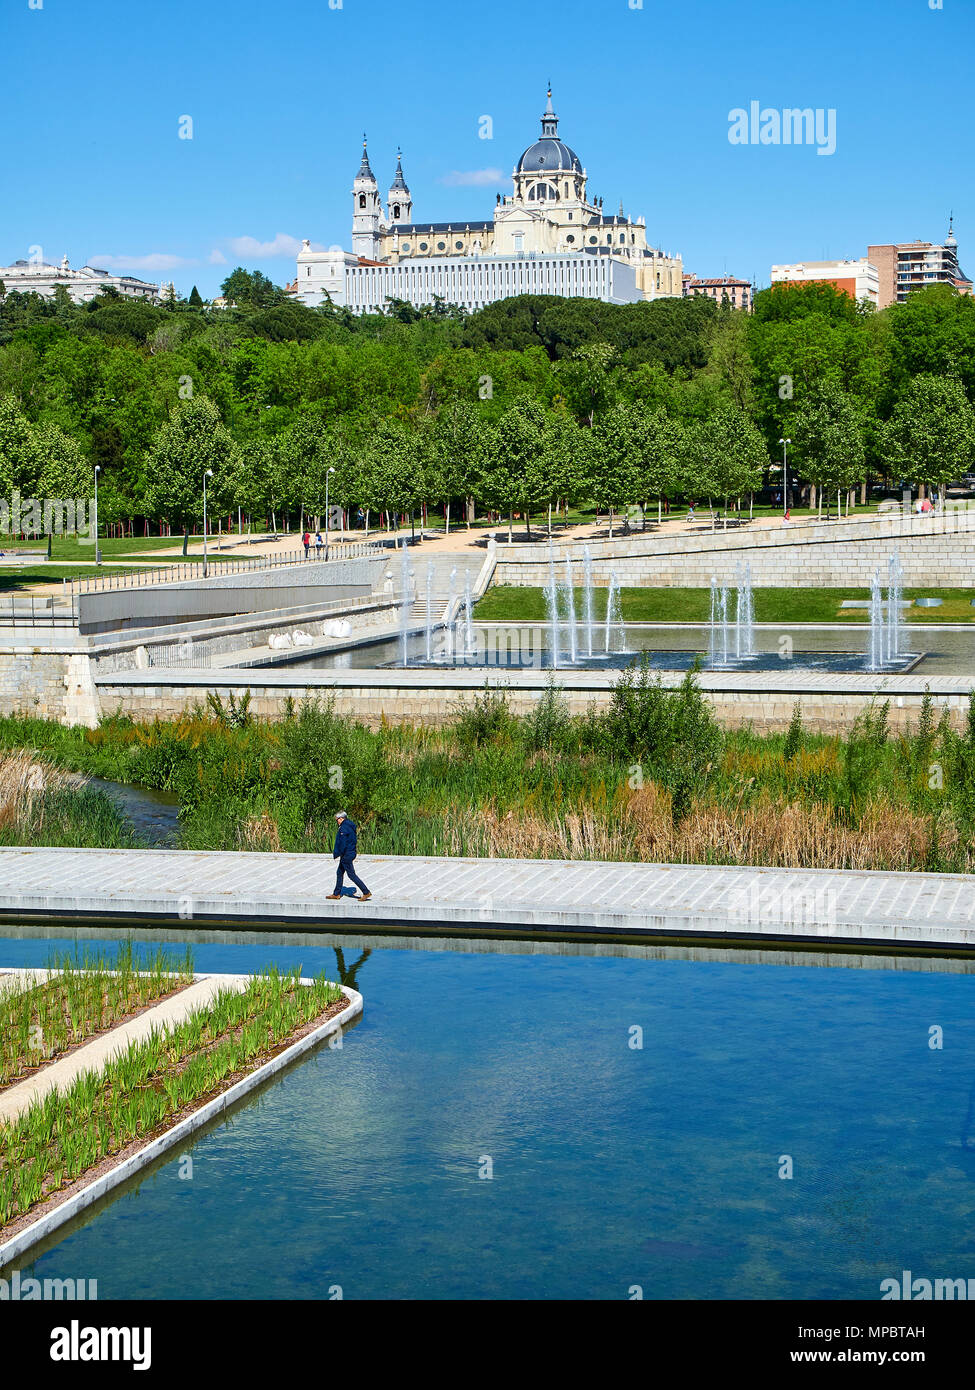 Puente de Segovia bridge crossing the gardens of Madrid Rio at spring day with the Almudena Cathedral in background and a men walking in foreground. Stock Photo